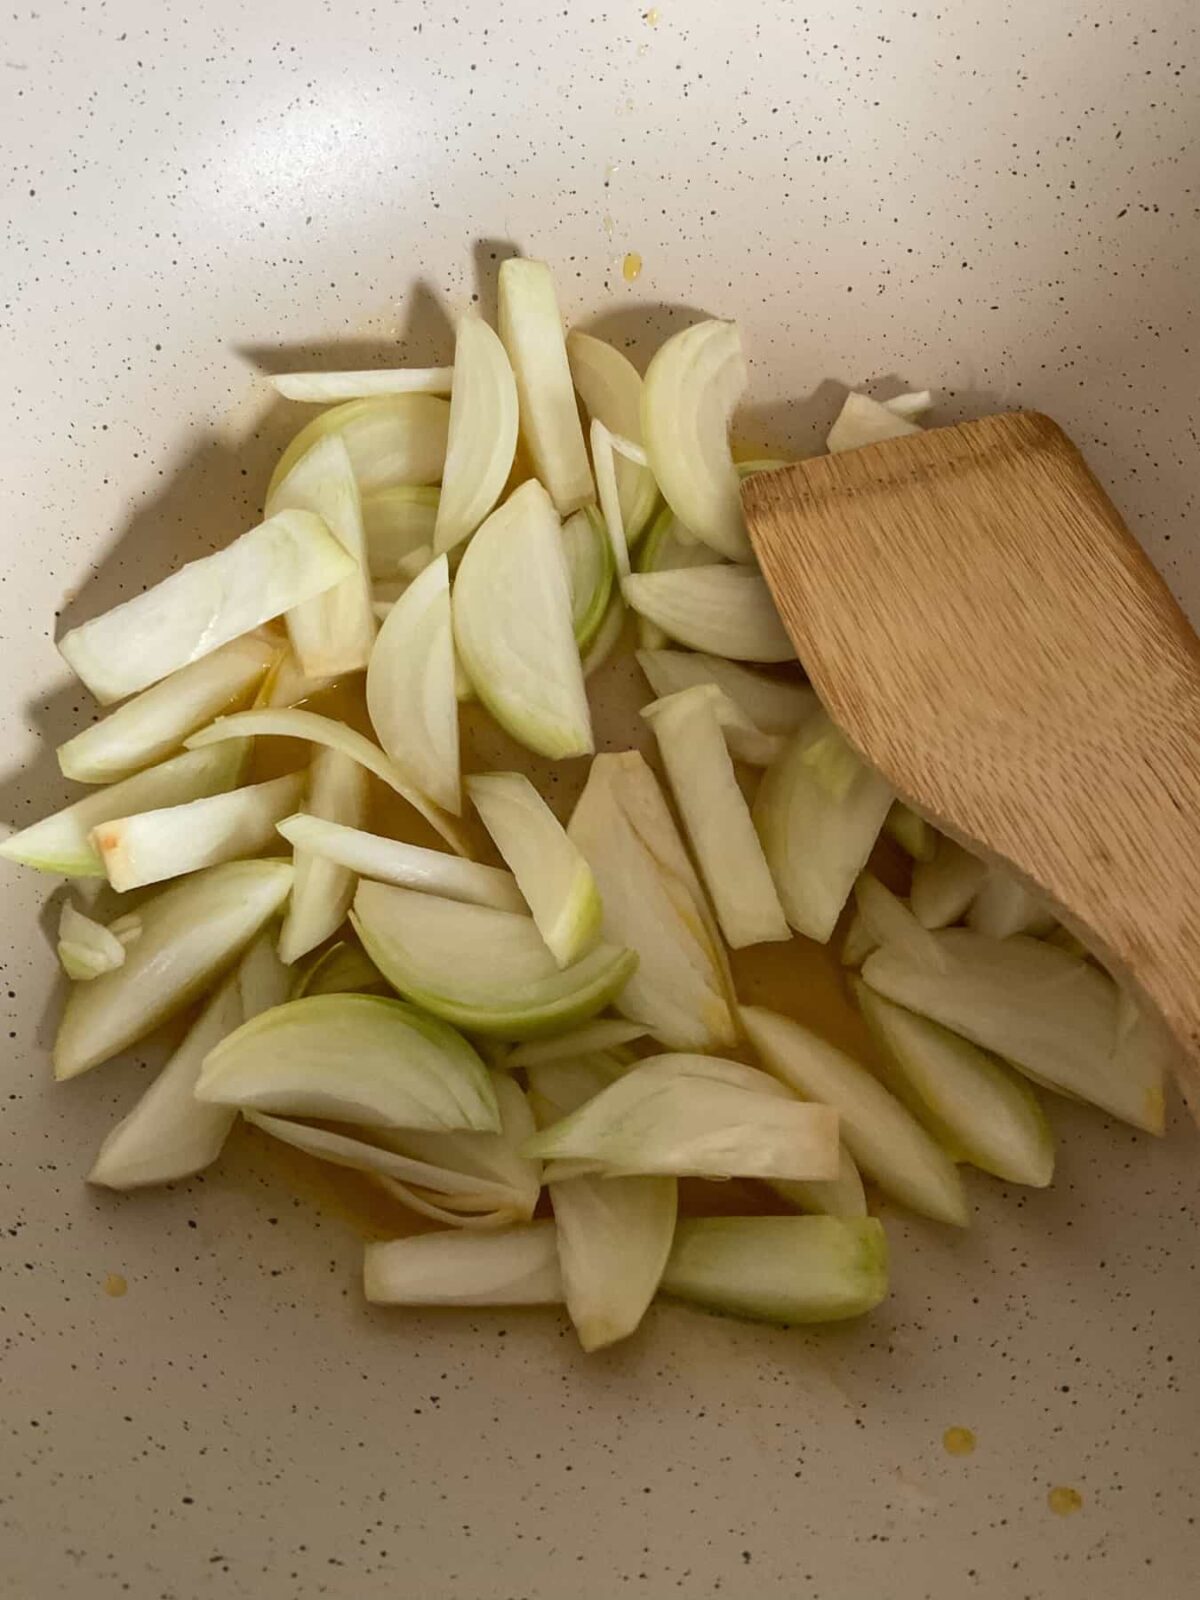 Onions sauteing in pan with wooden spatula.